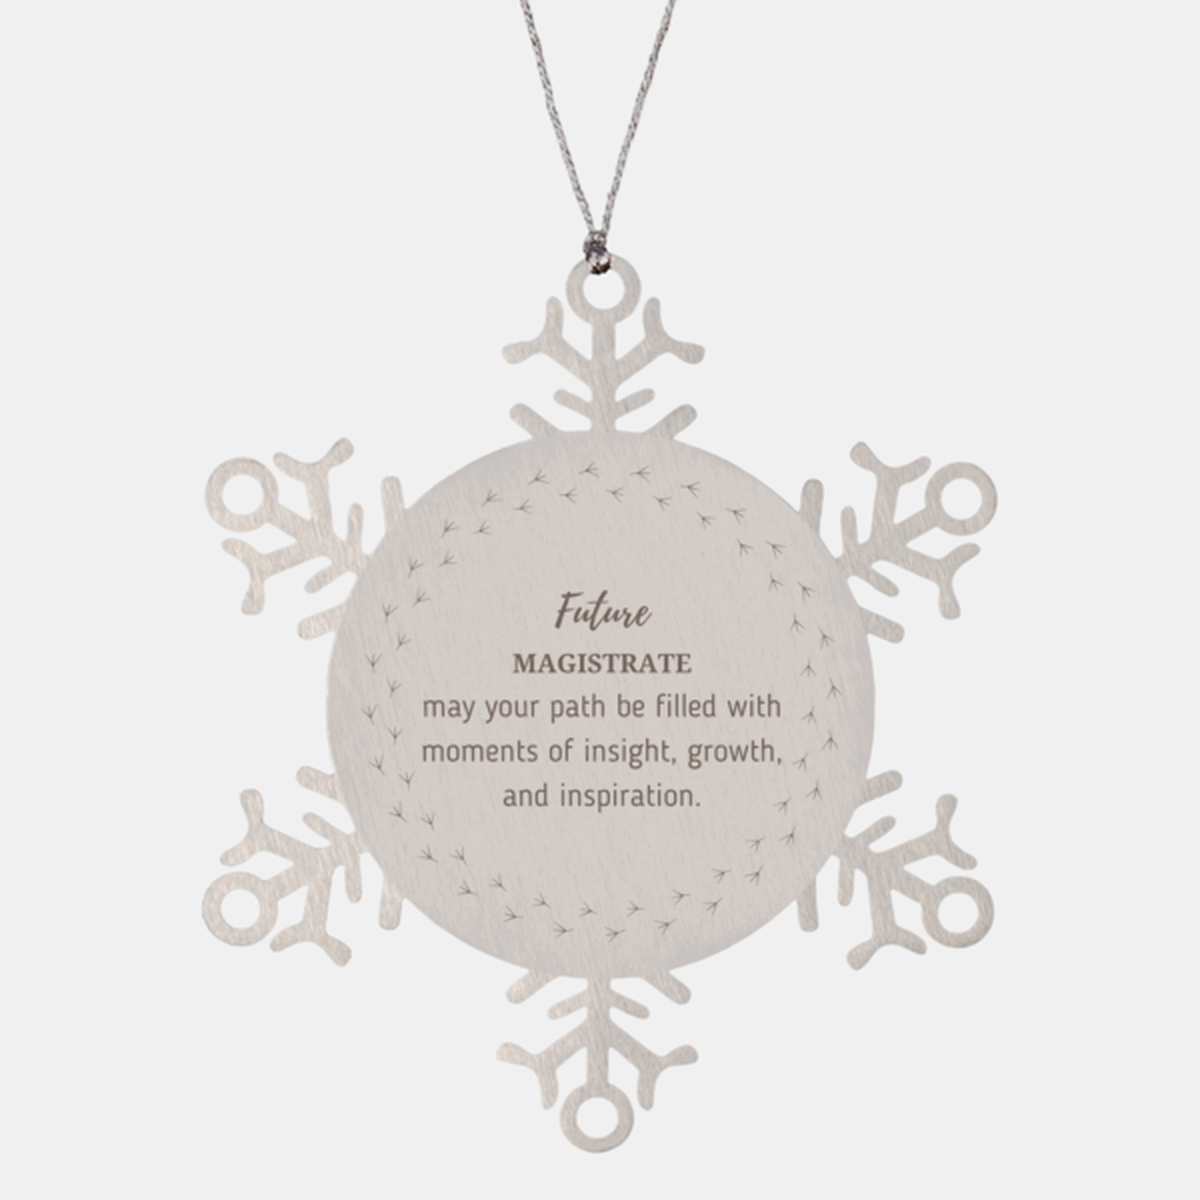 Future Magistrate Gifts, May your path be filled with moments of insight, Graduation Gifts for New Magistrate, Christmas Unique Snowflake Ornament For Men, Women, Friends